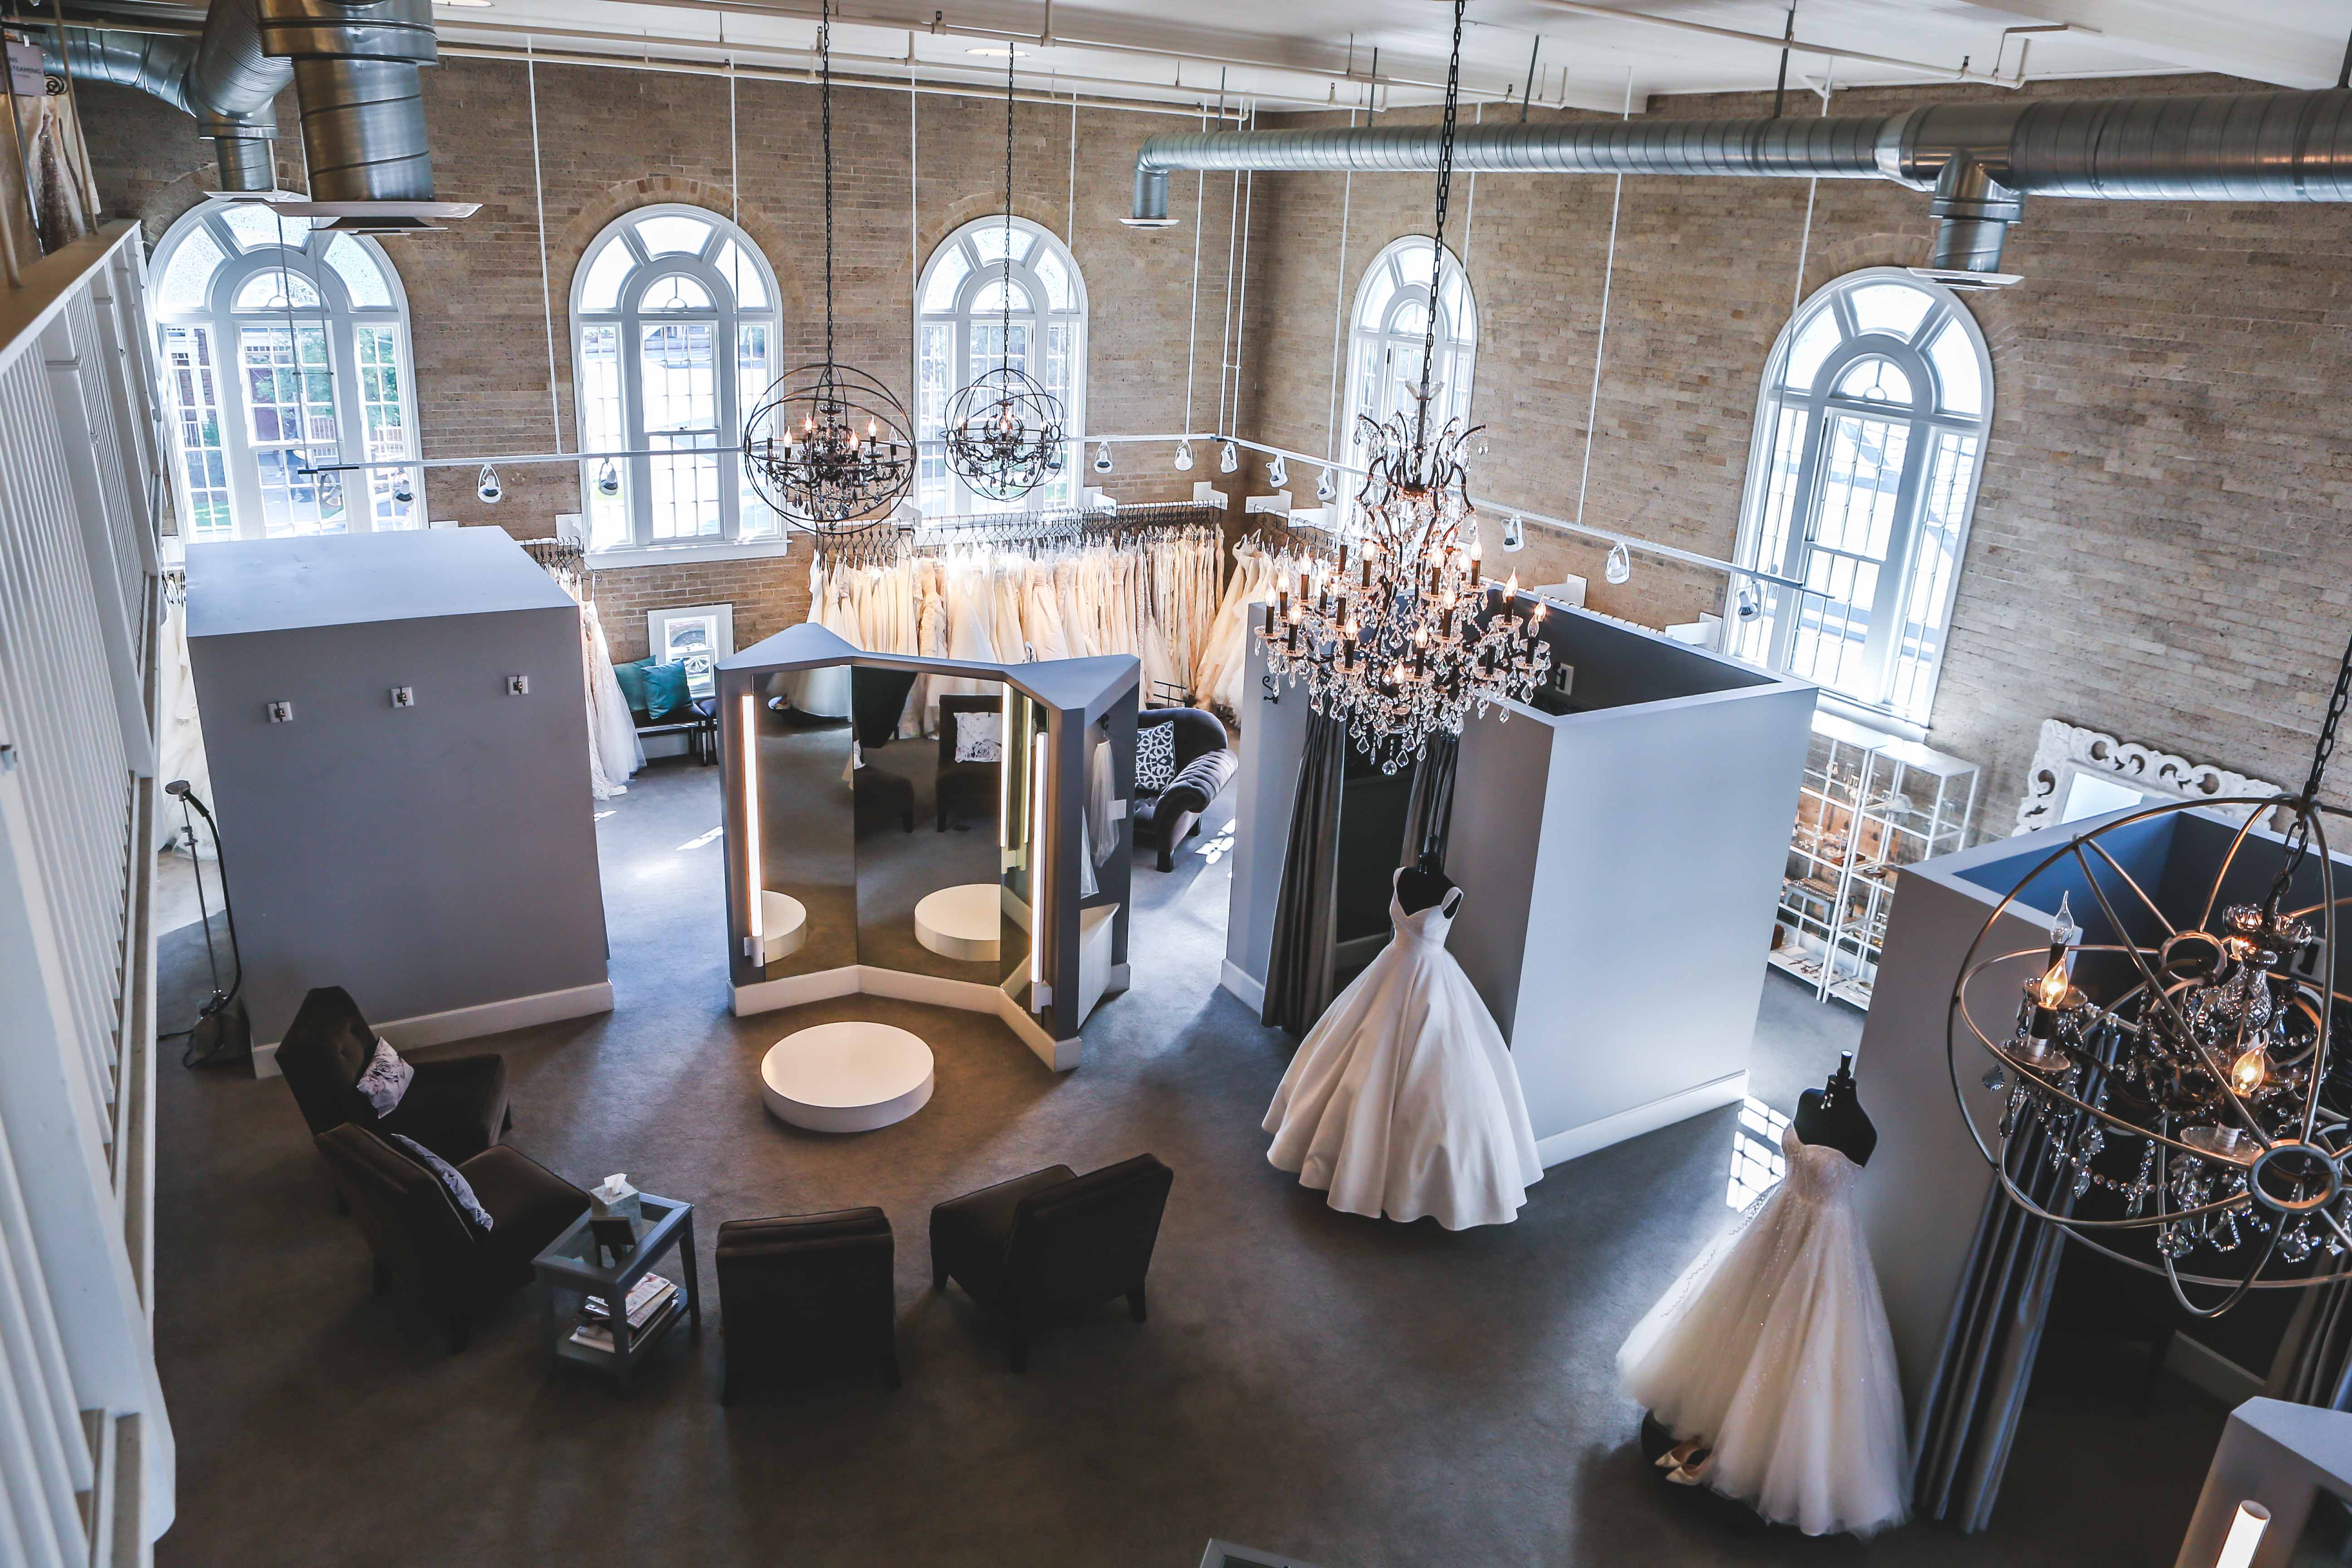 Bridal Boutique Finds Home In 100 Year Old Church 303 Magazine